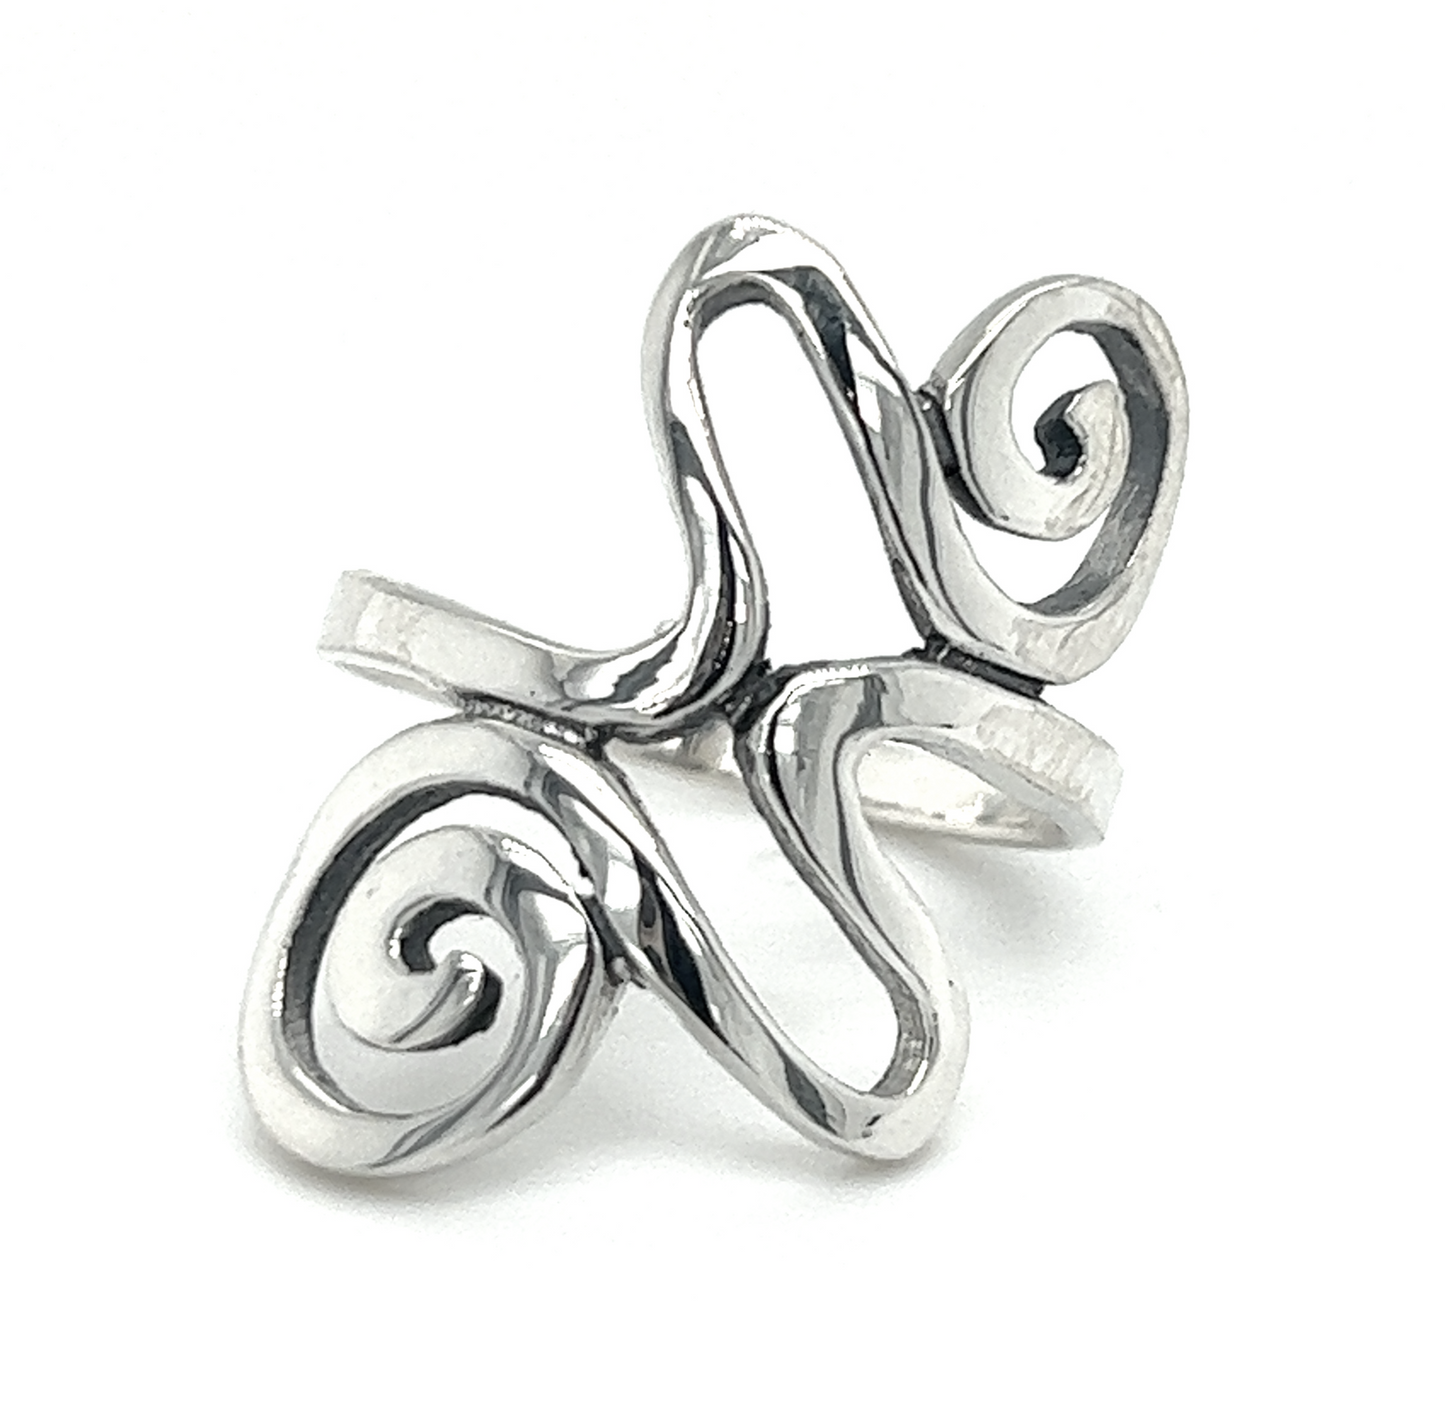 A Funky Spiral Freeform Ring.